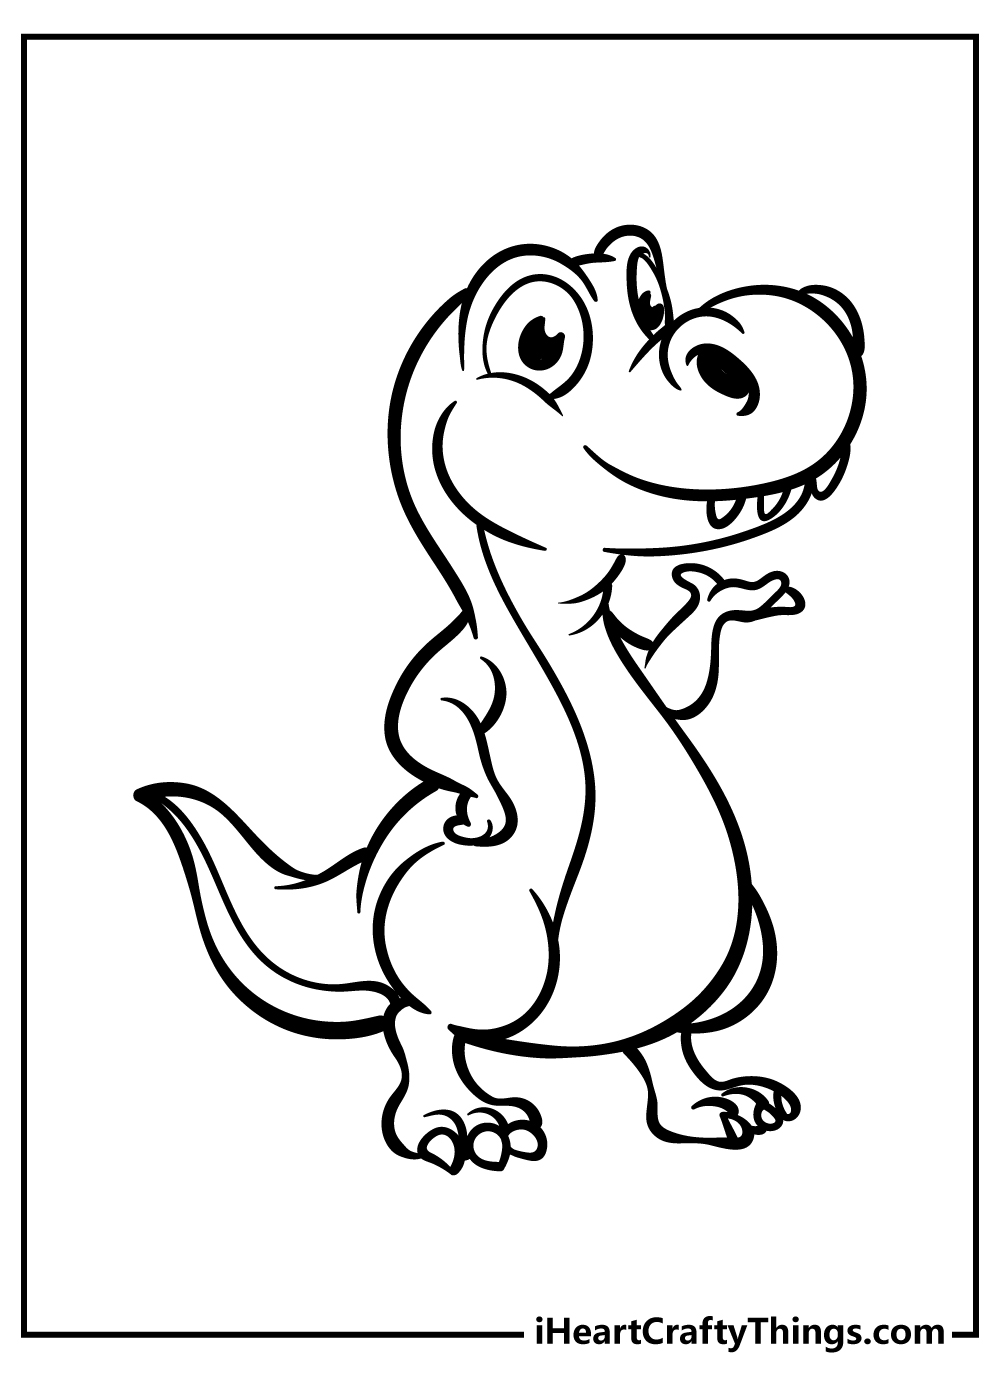 Baby Dinosaur Coloring Pages free pdf download